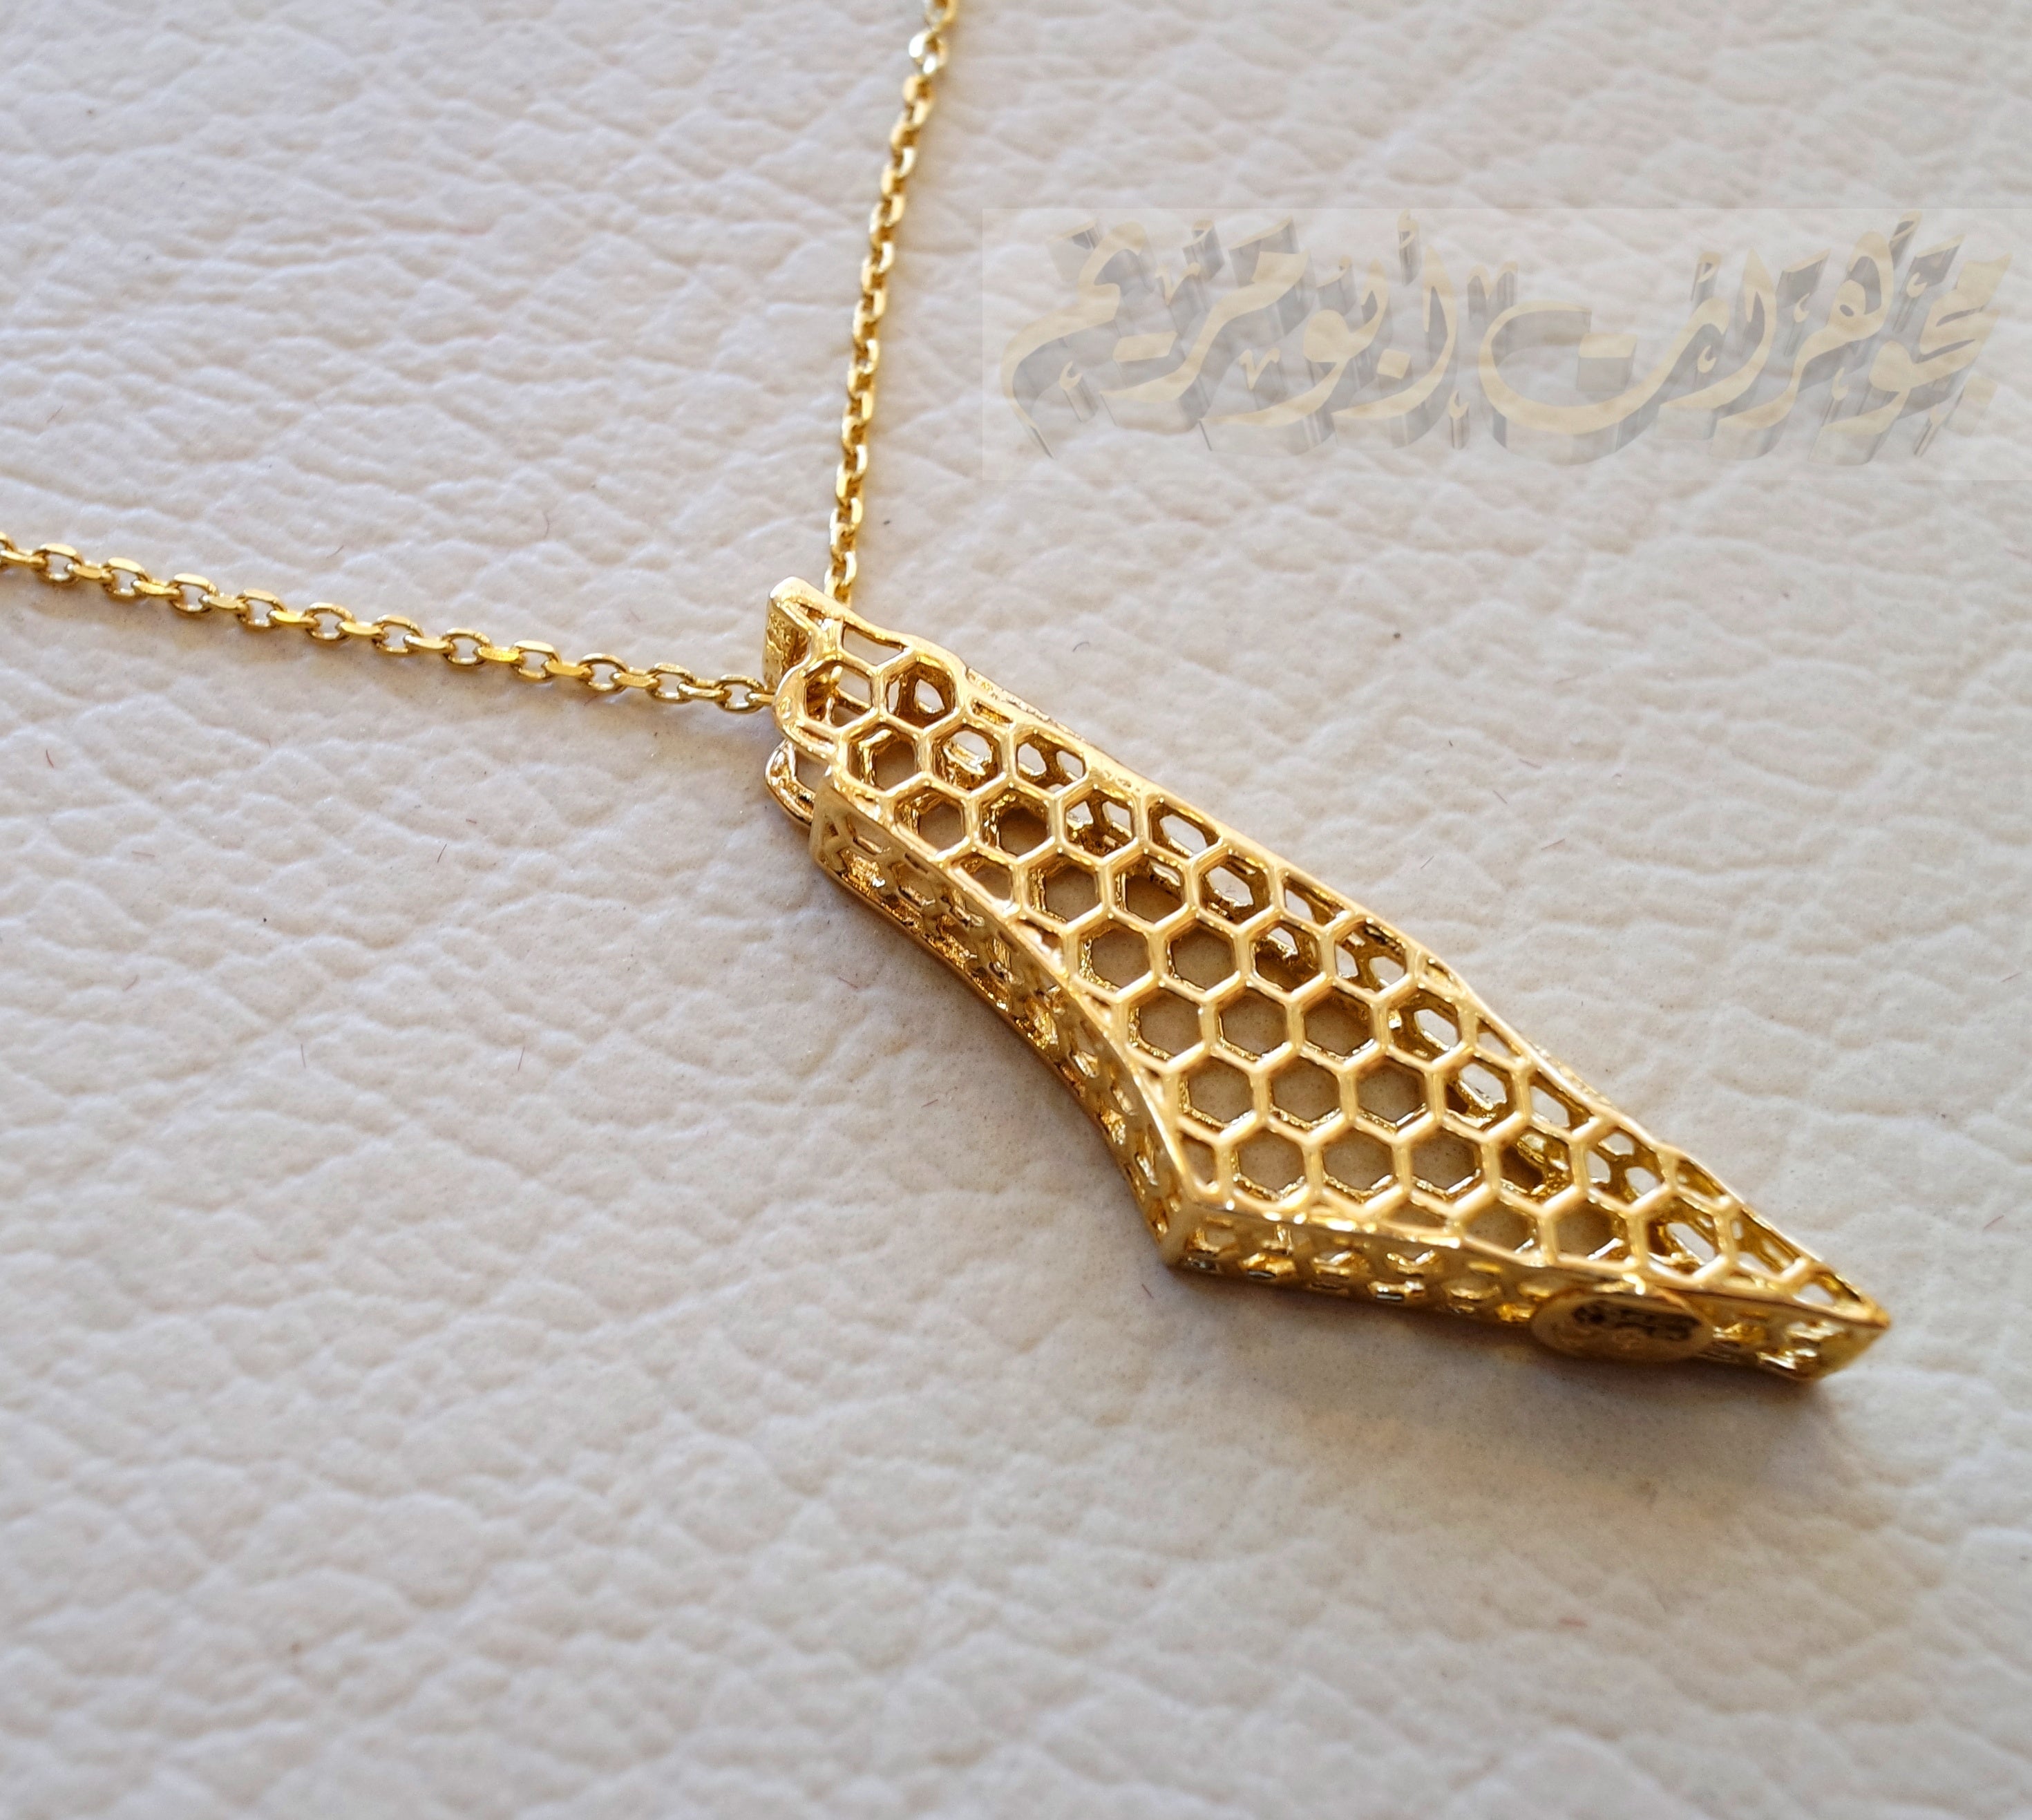 Honeycomb Palestine map 3d 18K yellow gold necklace pendant and chain gift fine jewelry full insured shipping